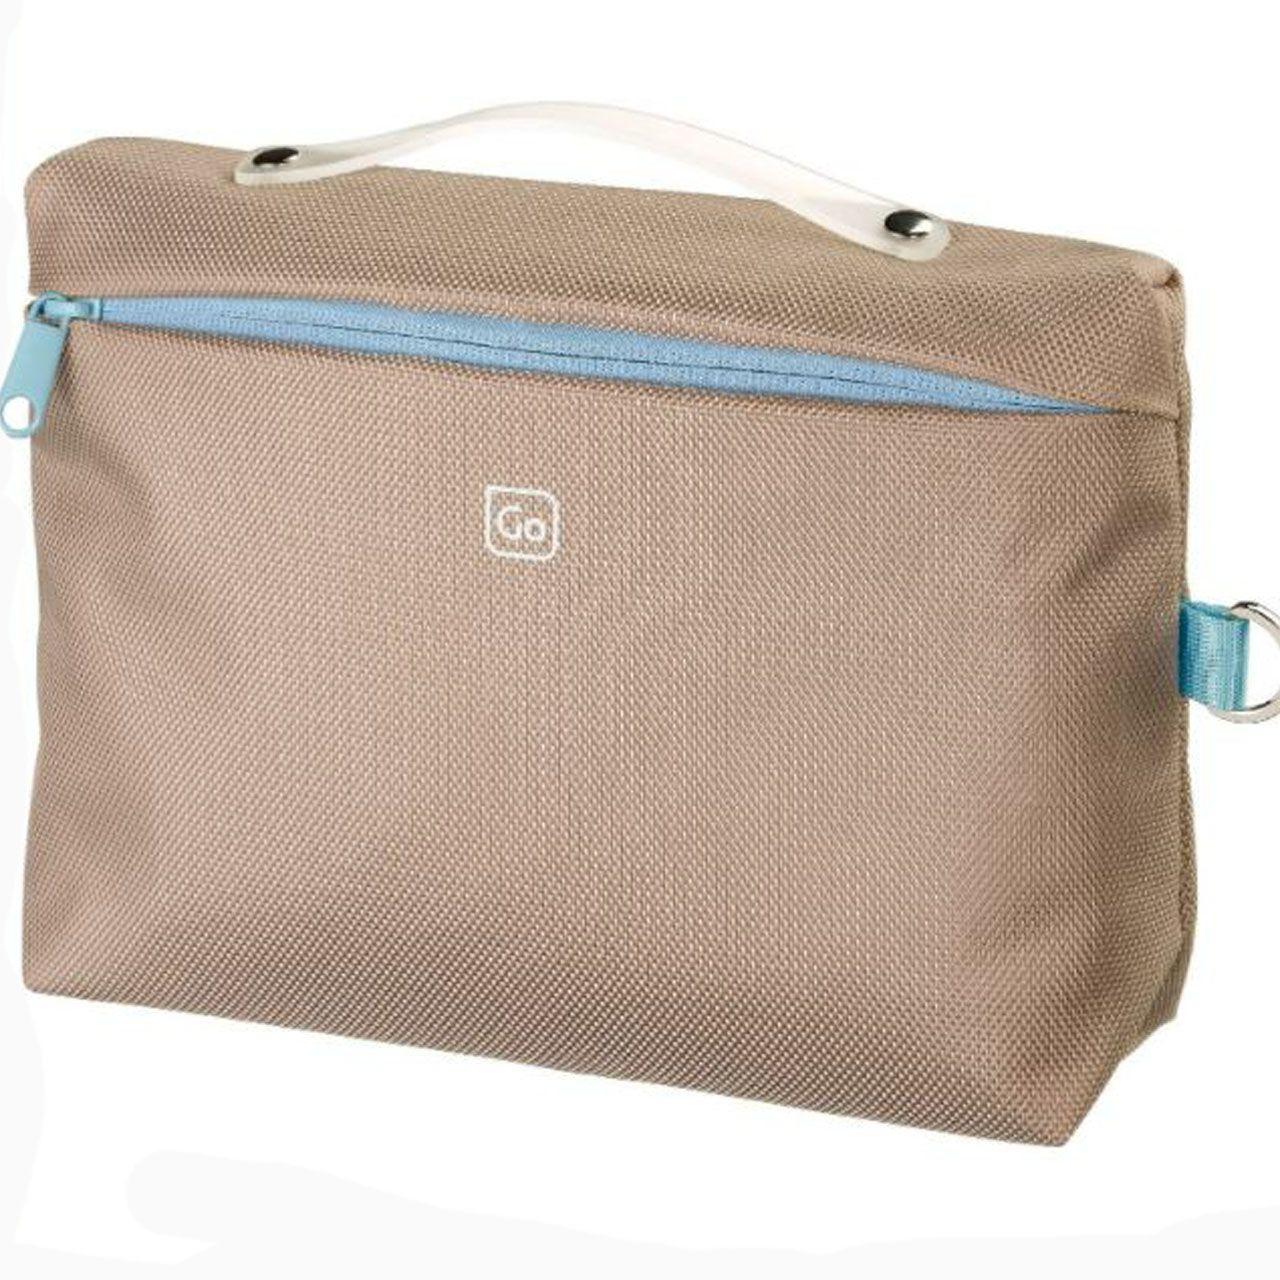 Washable Washbag for Weekends Away-2